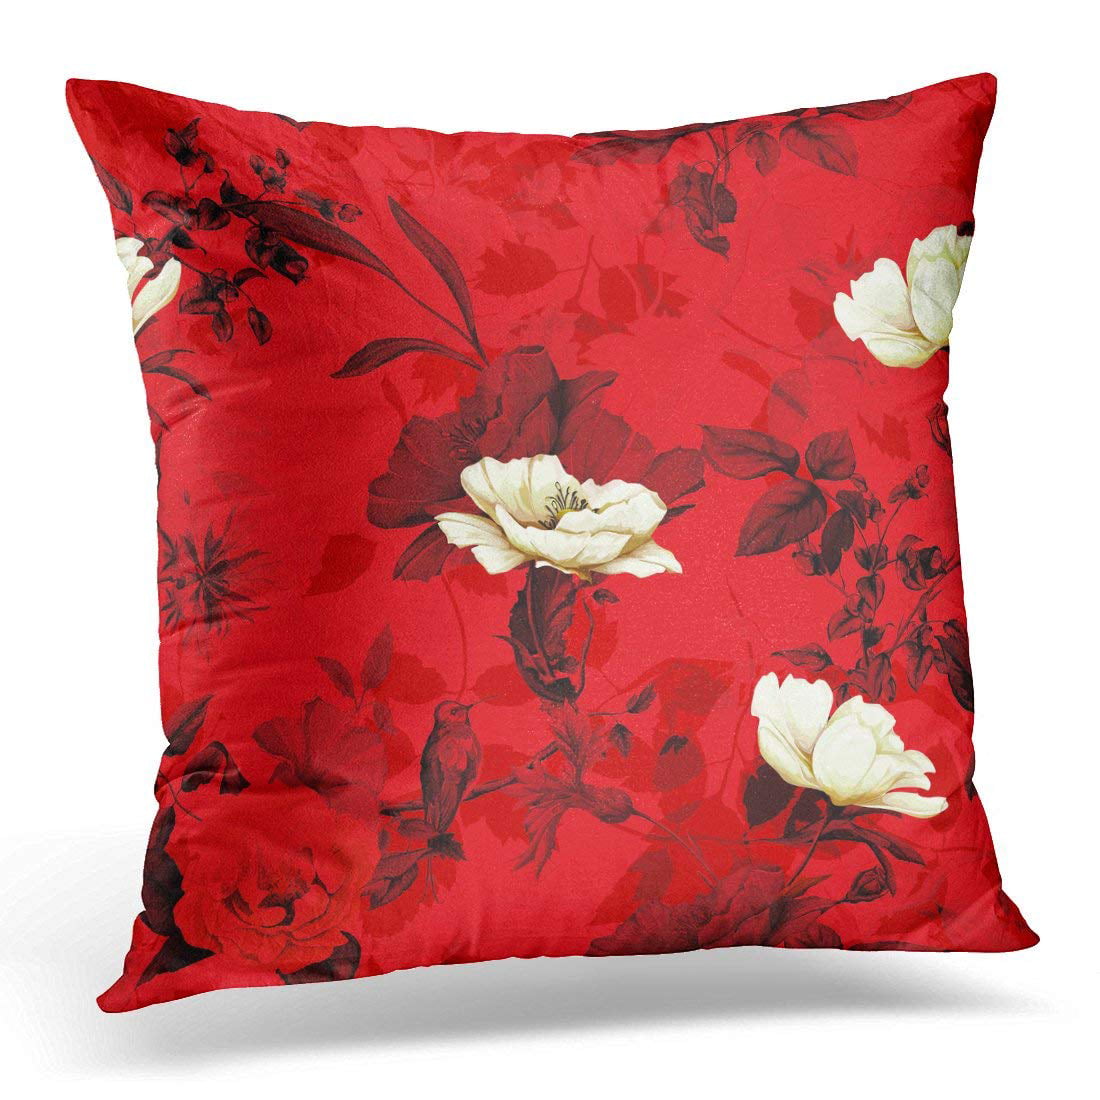 Details about   Ambesonne Floral Nature Body Pillow Case Cover with Zipper Decorative Accent